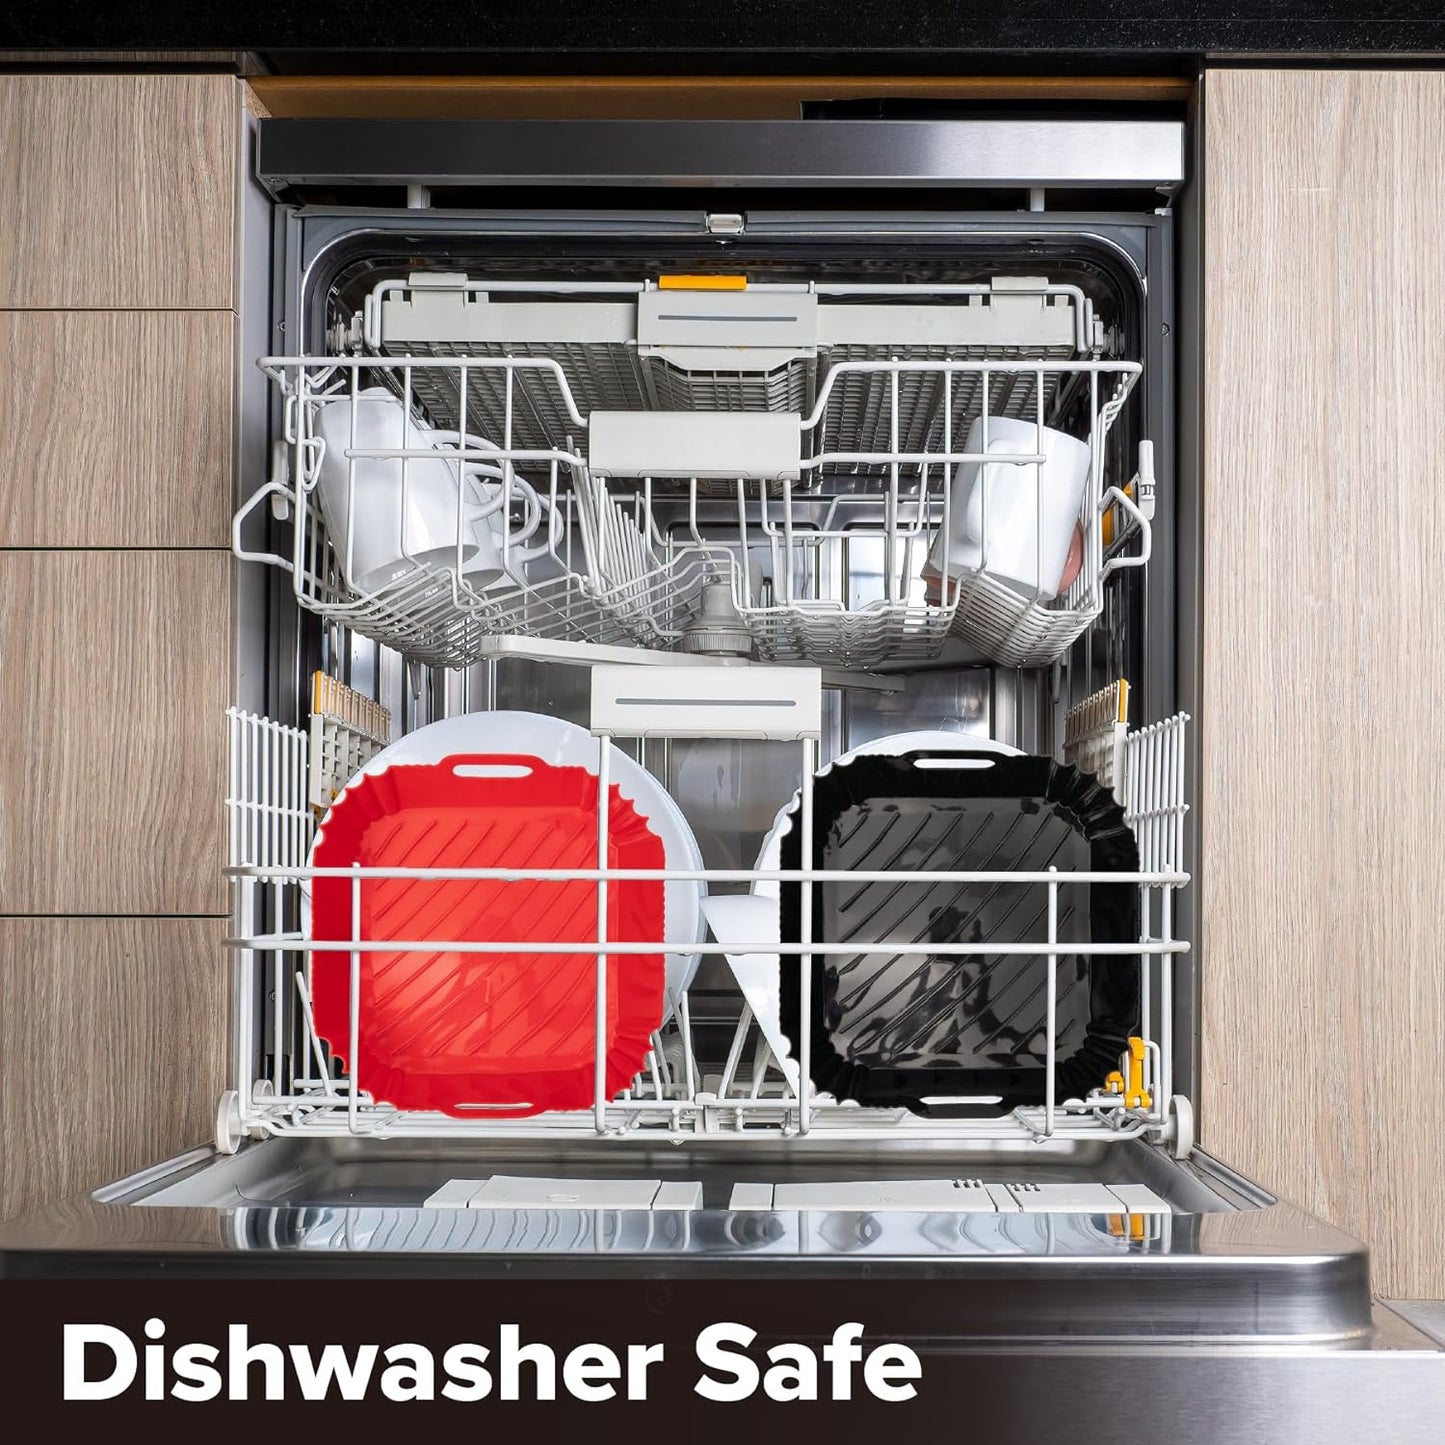 a dishwasher with plates and dishes inside with text: 'Dishwasher Safe'